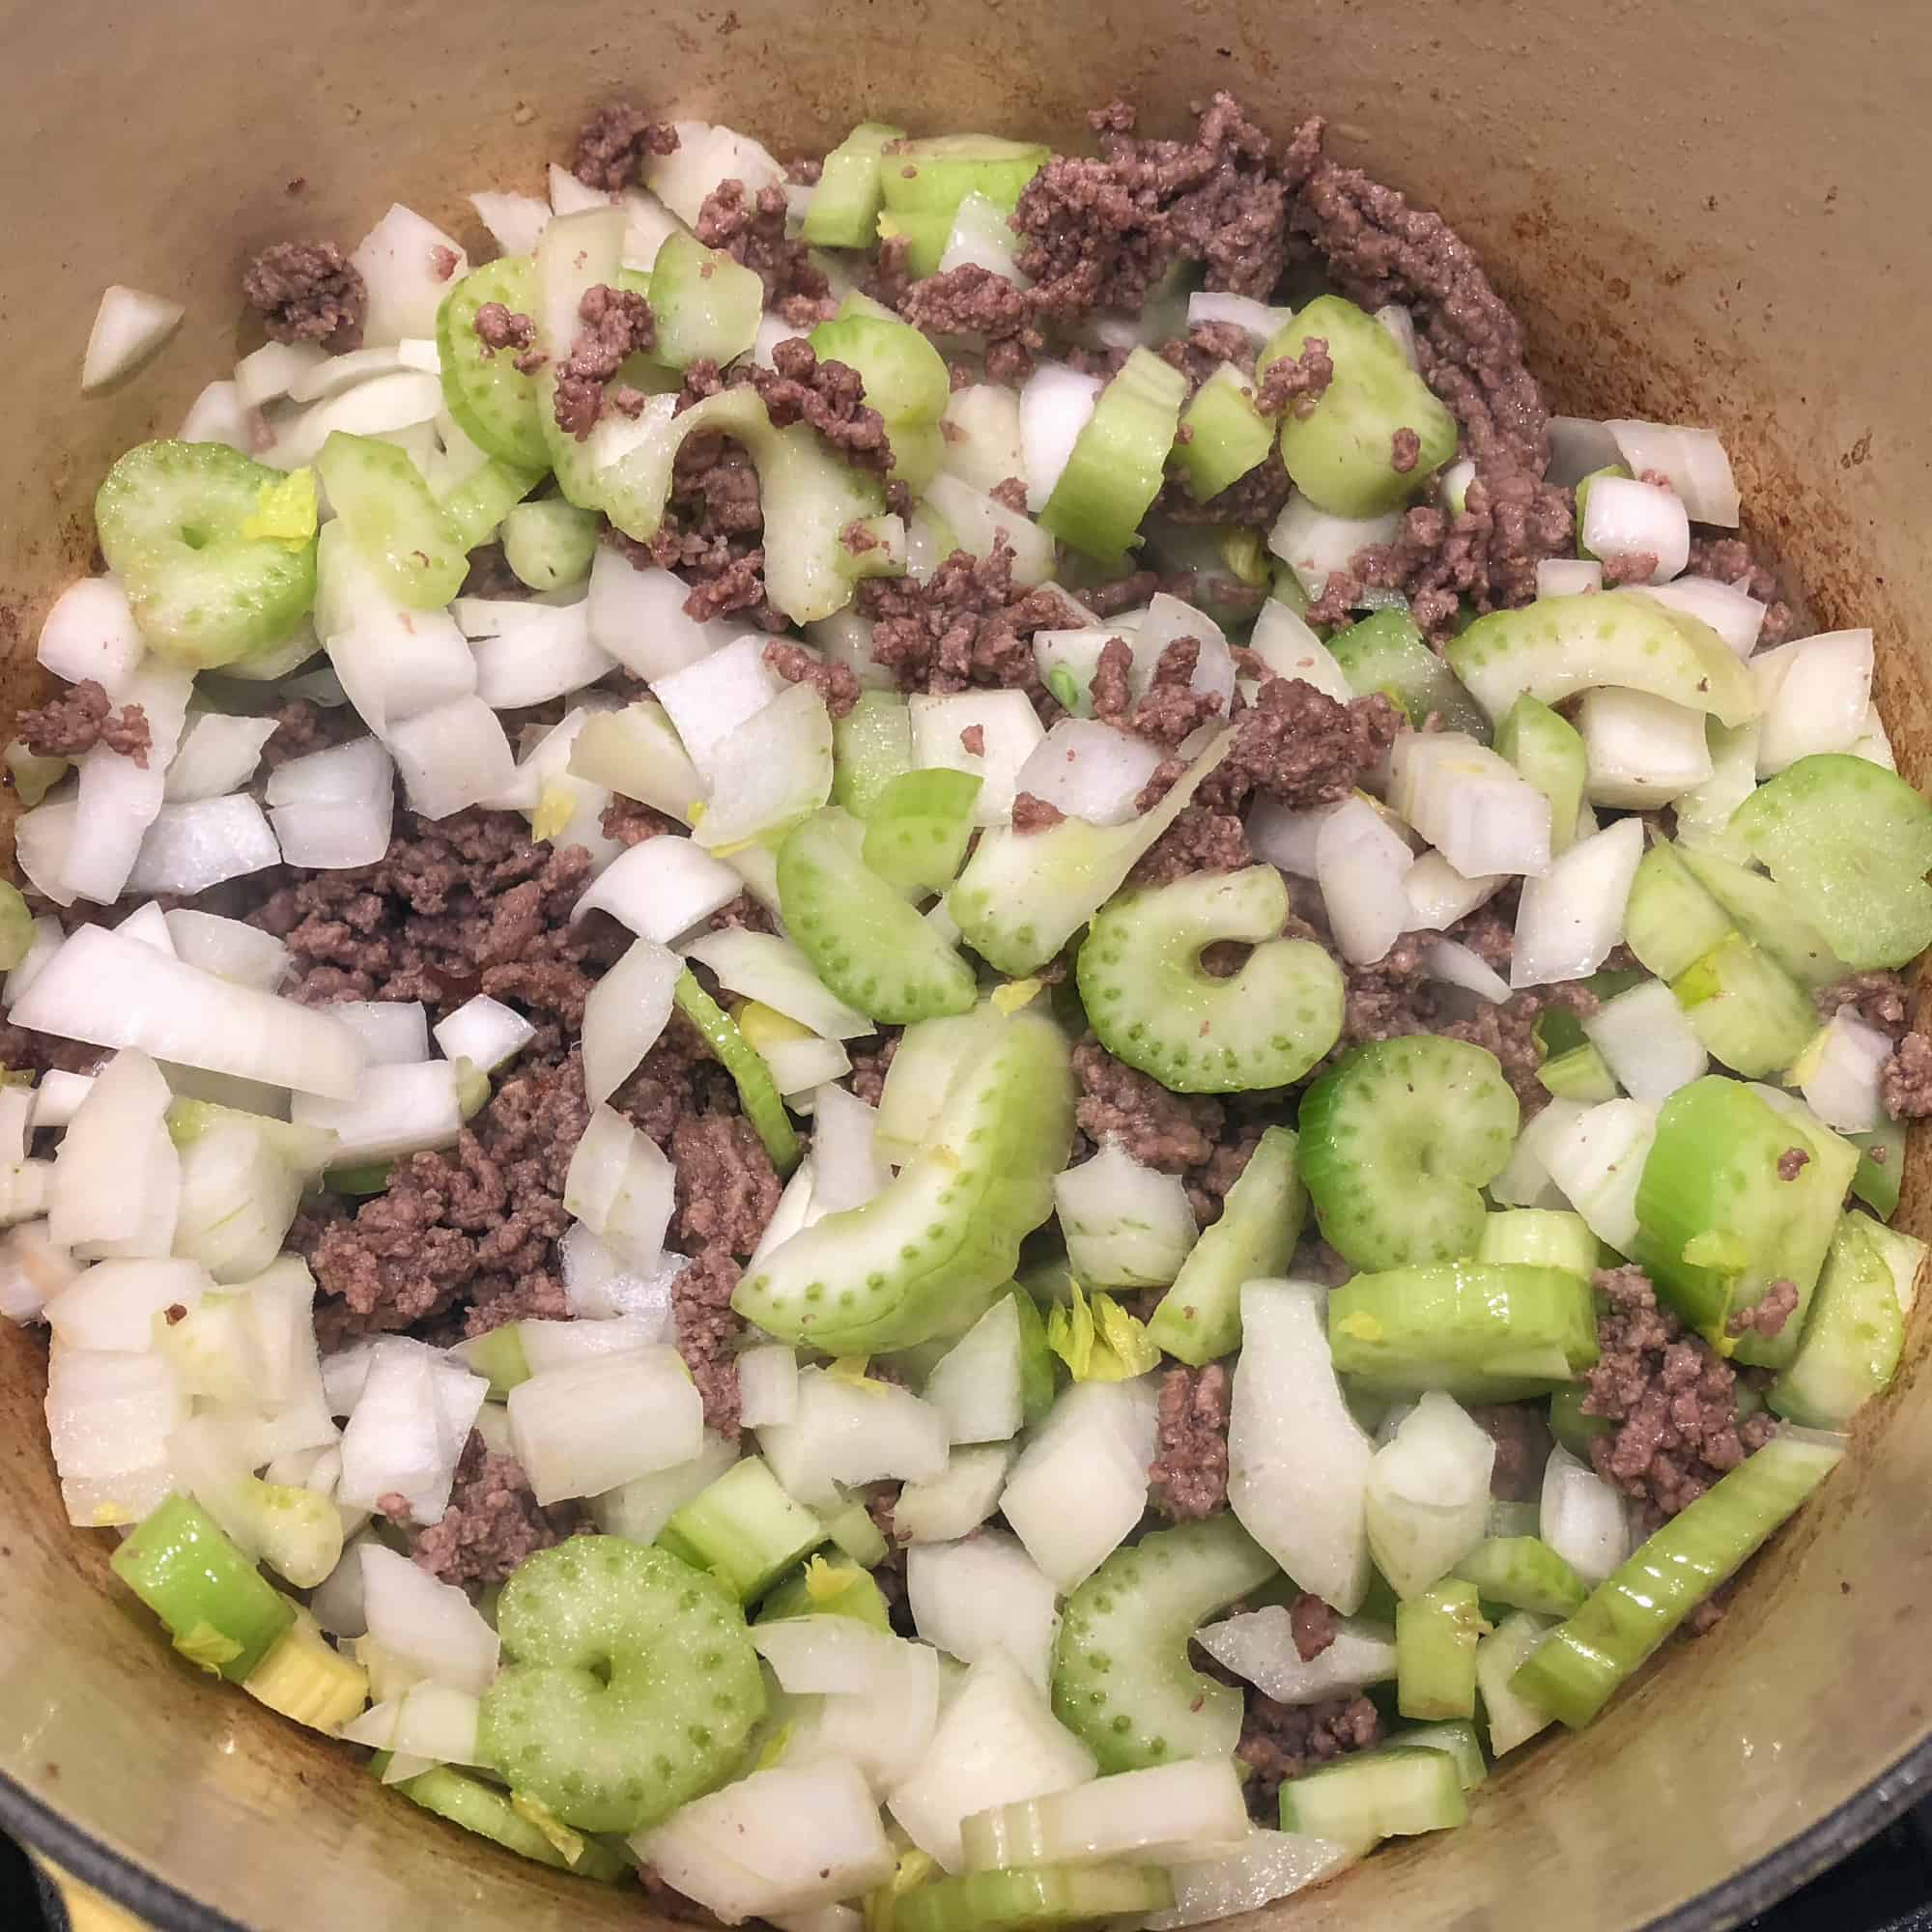 Add the onions and celery